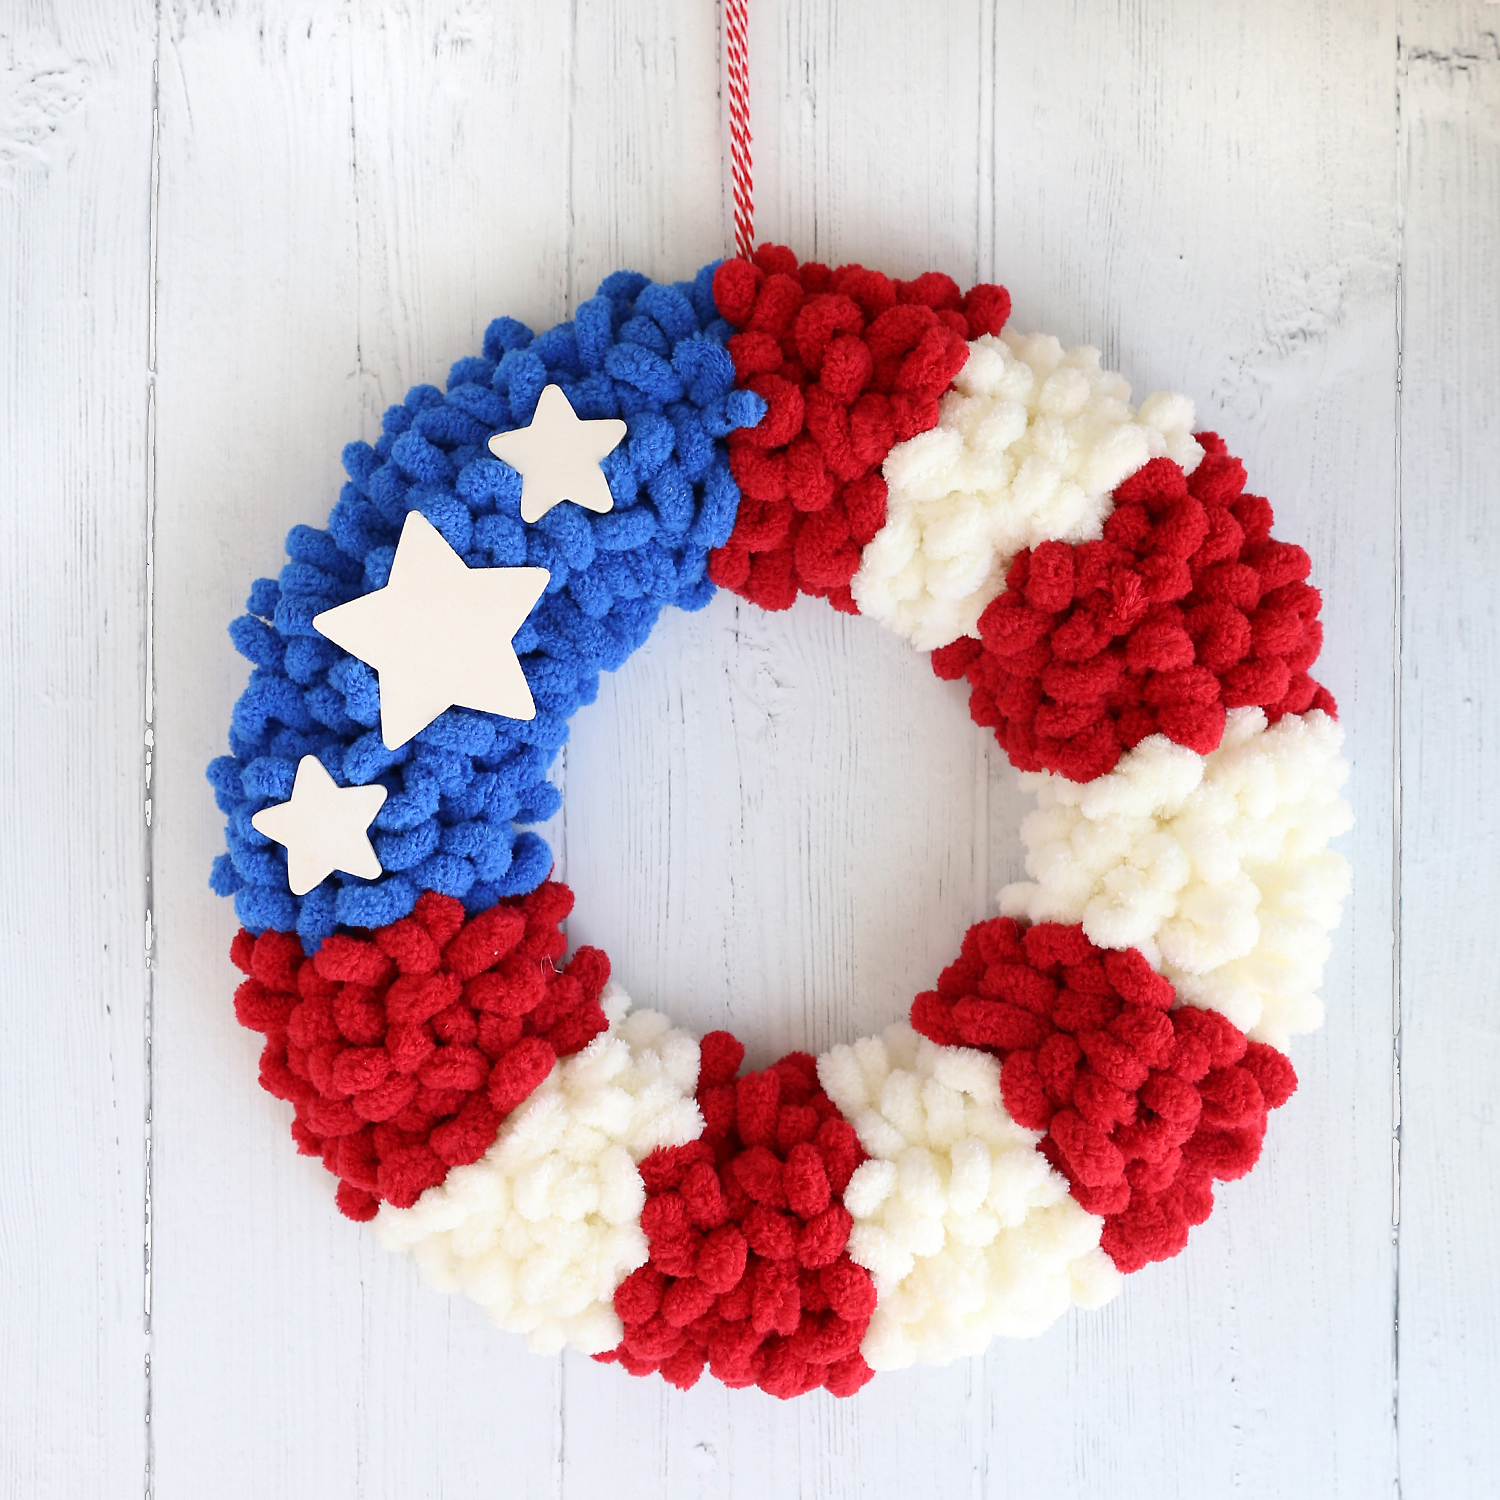 Patriotic Decorative String Balls Craft for Memorial Day or Fourth